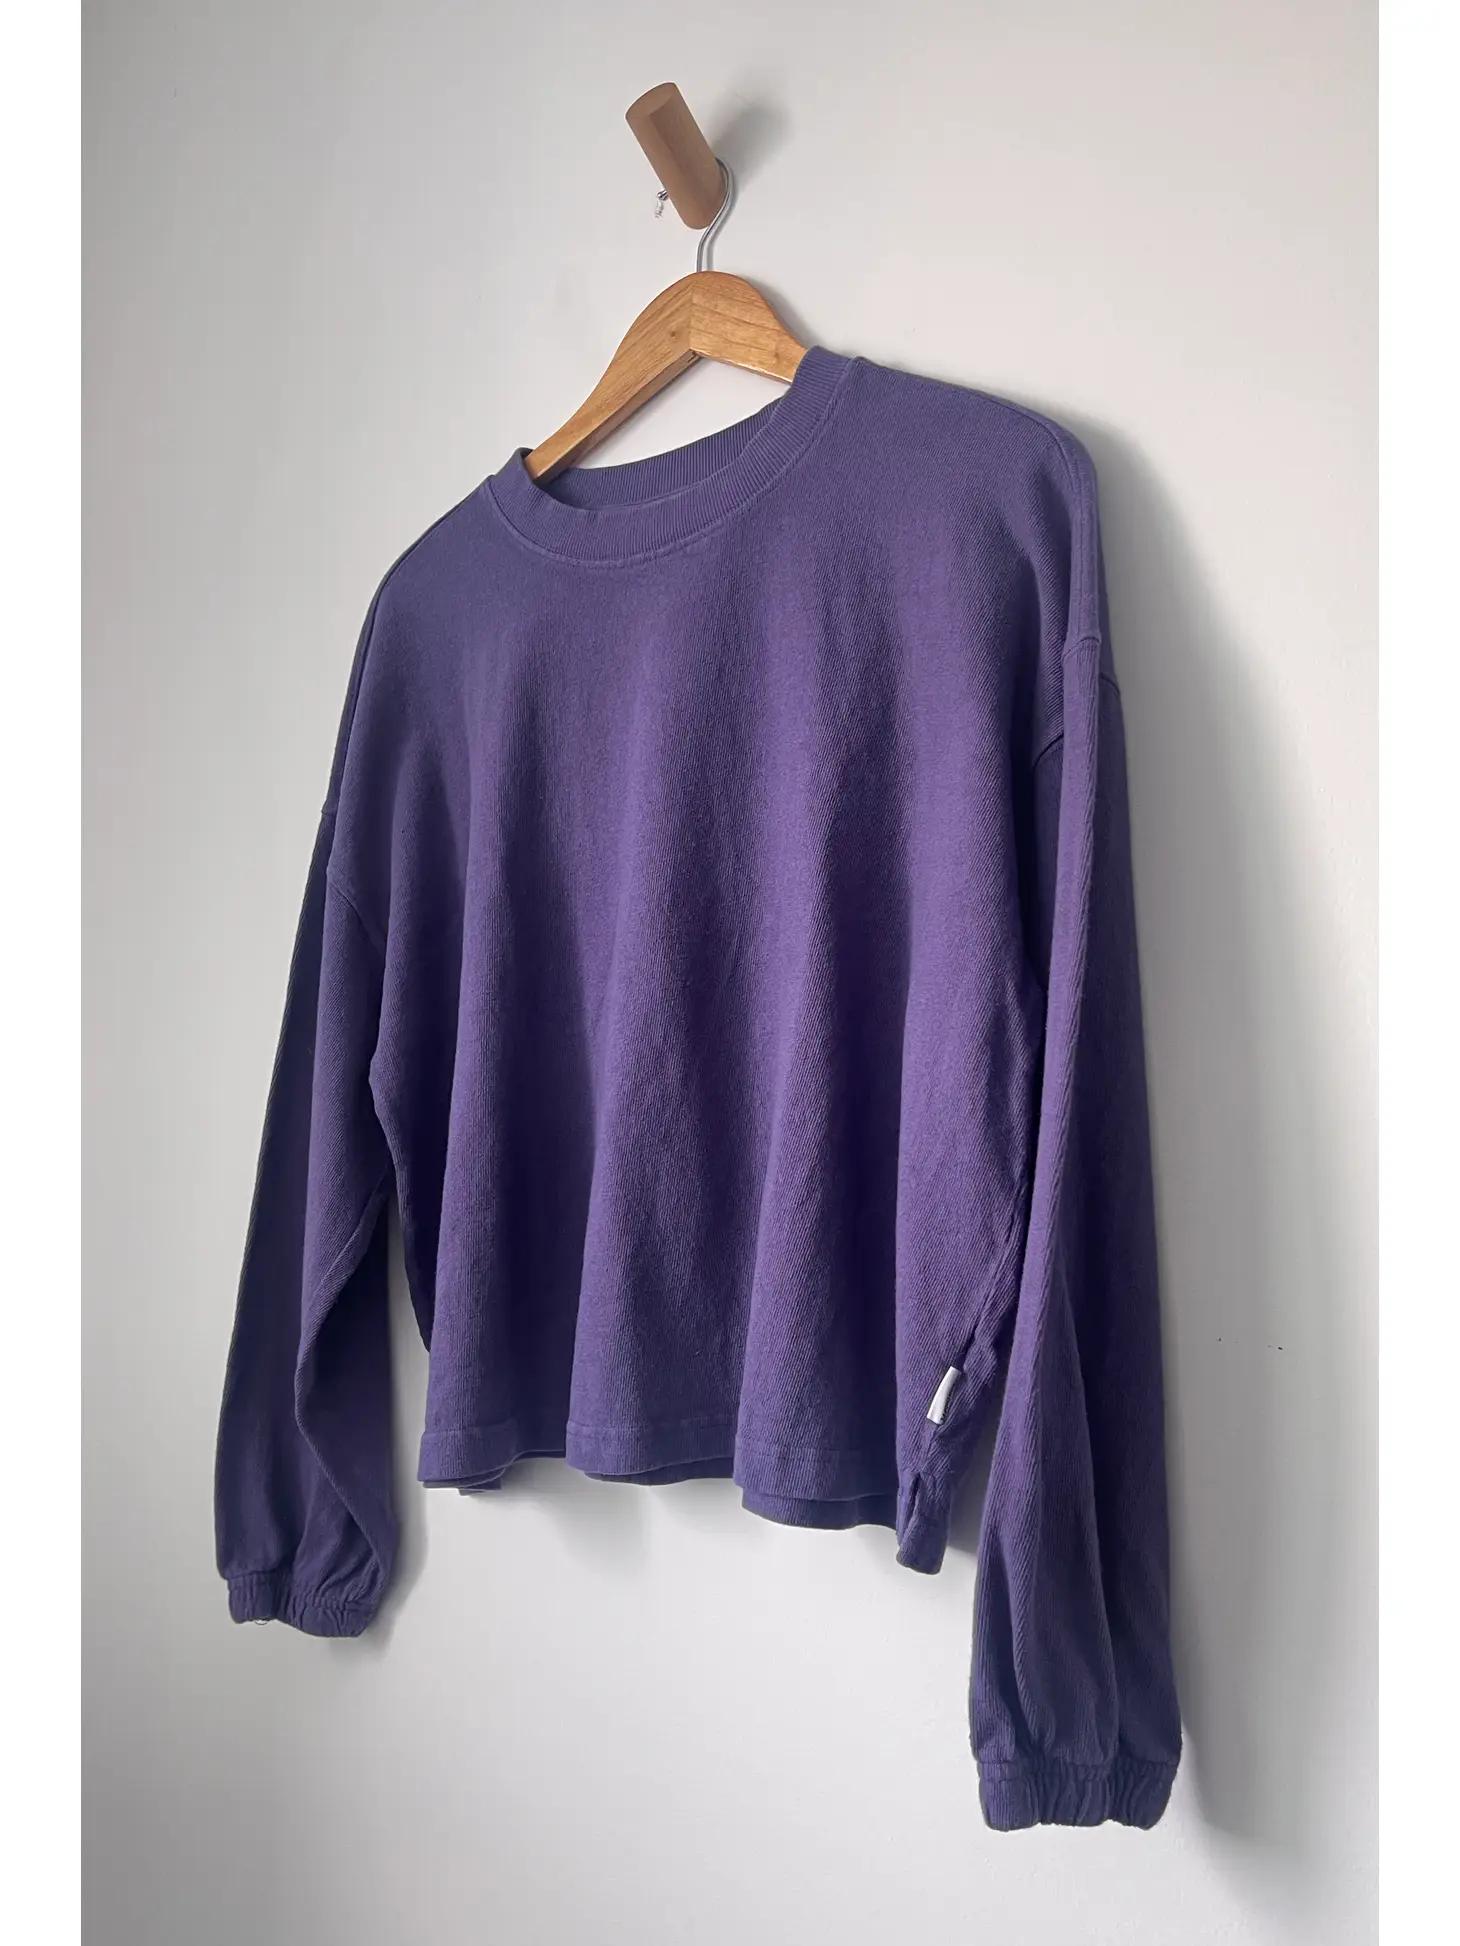 Product Image for Naturelle Tee, Eggplant